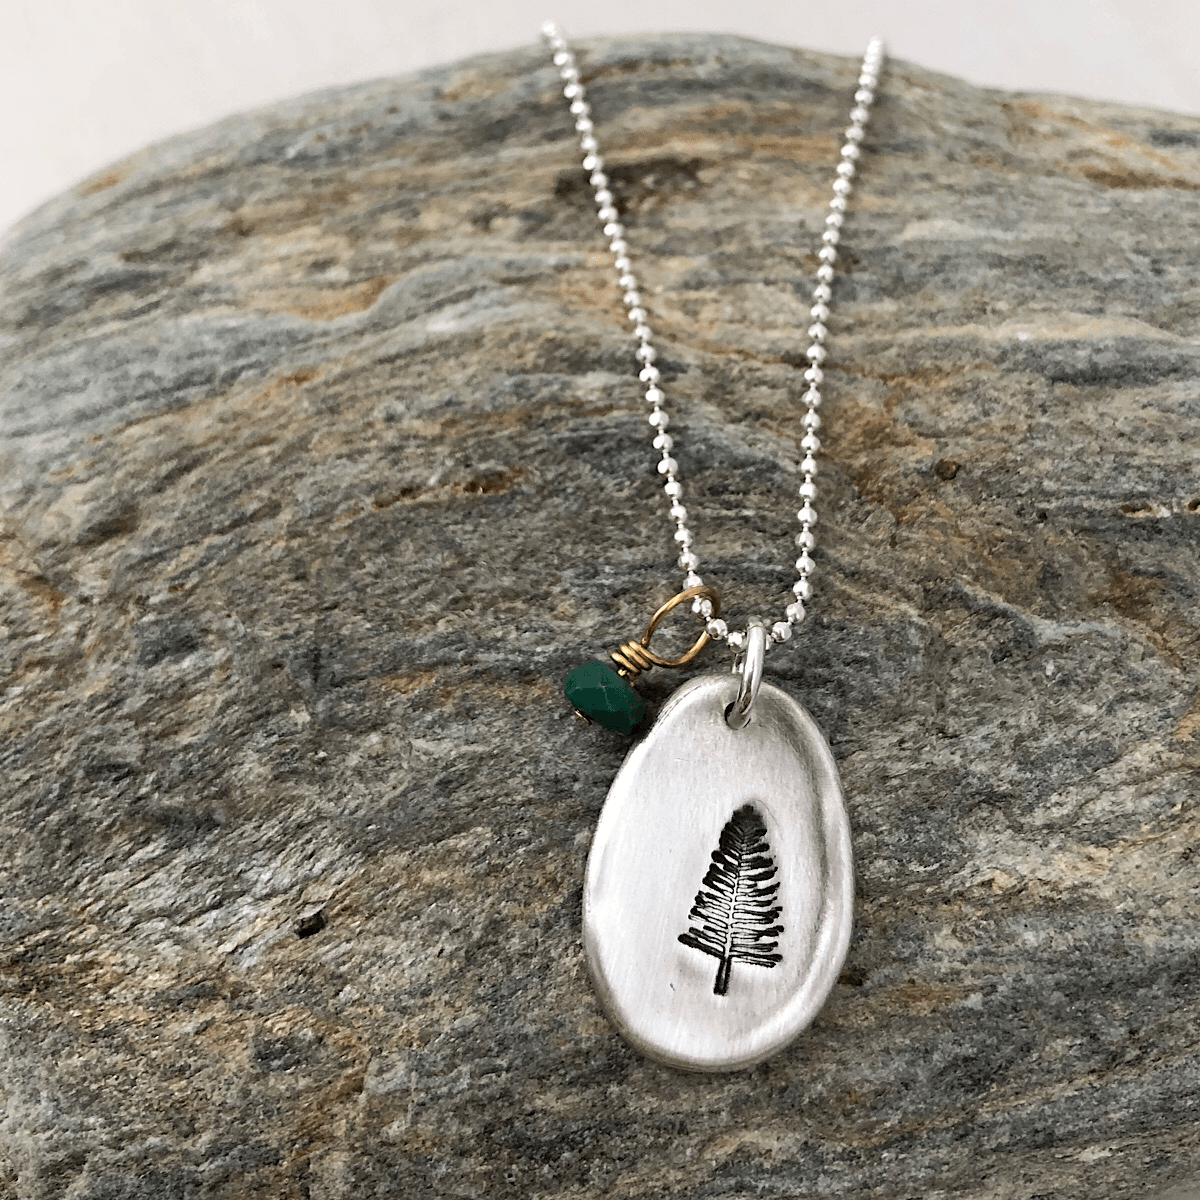 Stand Tall Pebble Necklace  - IsabelleGraceJewelry